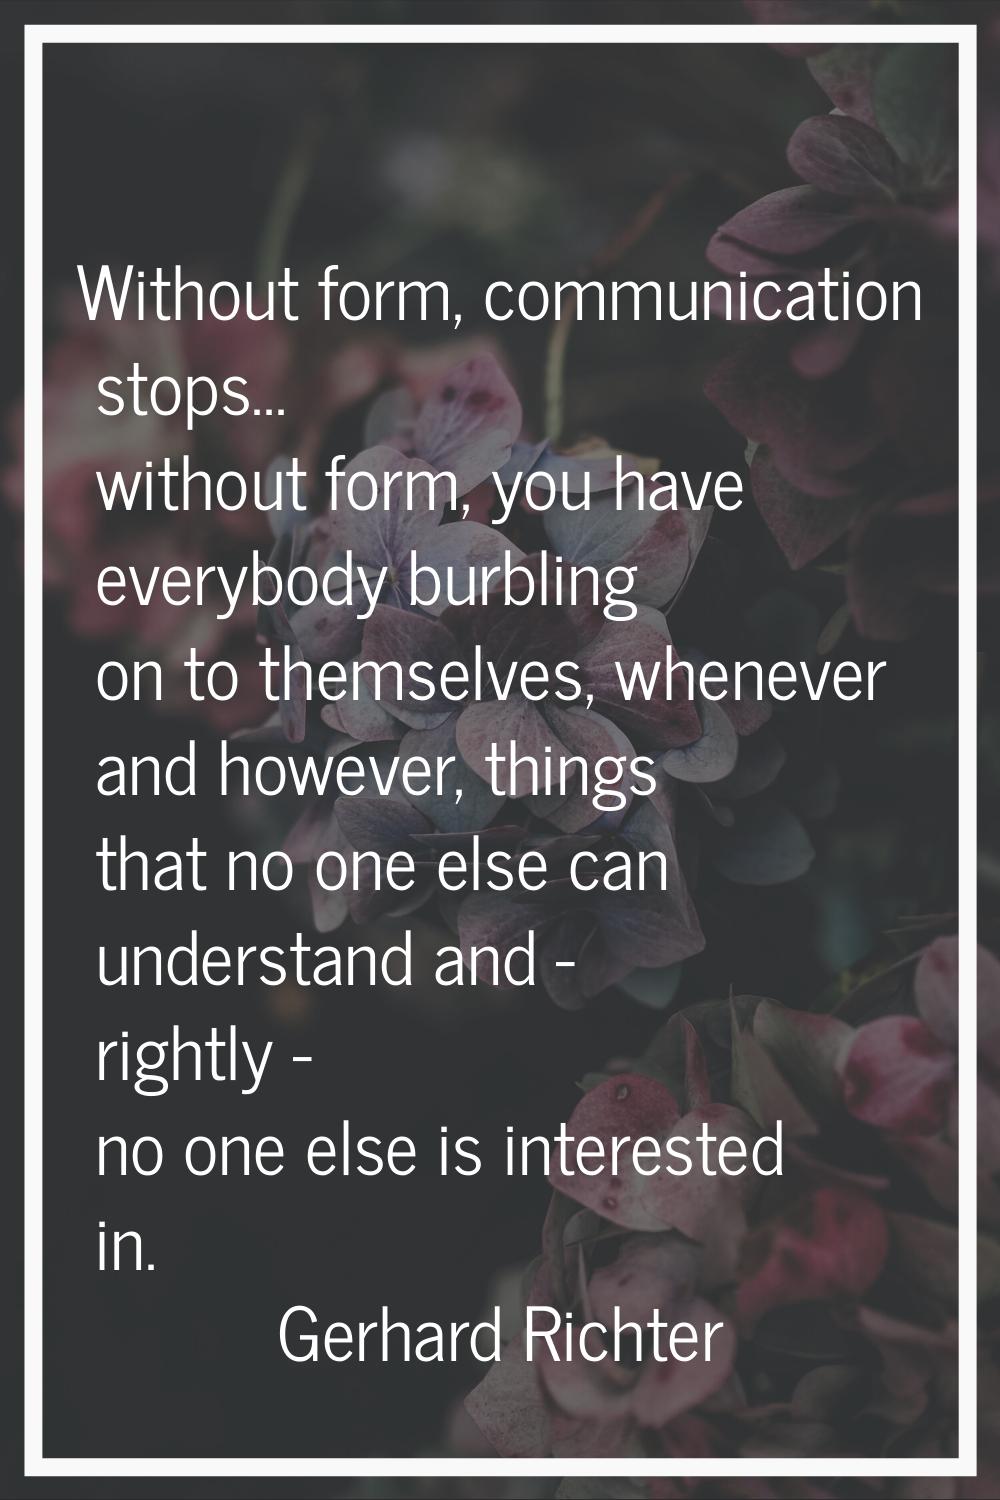 Without form, communication stops... without form, you have everybody burbling on to themselves, wh